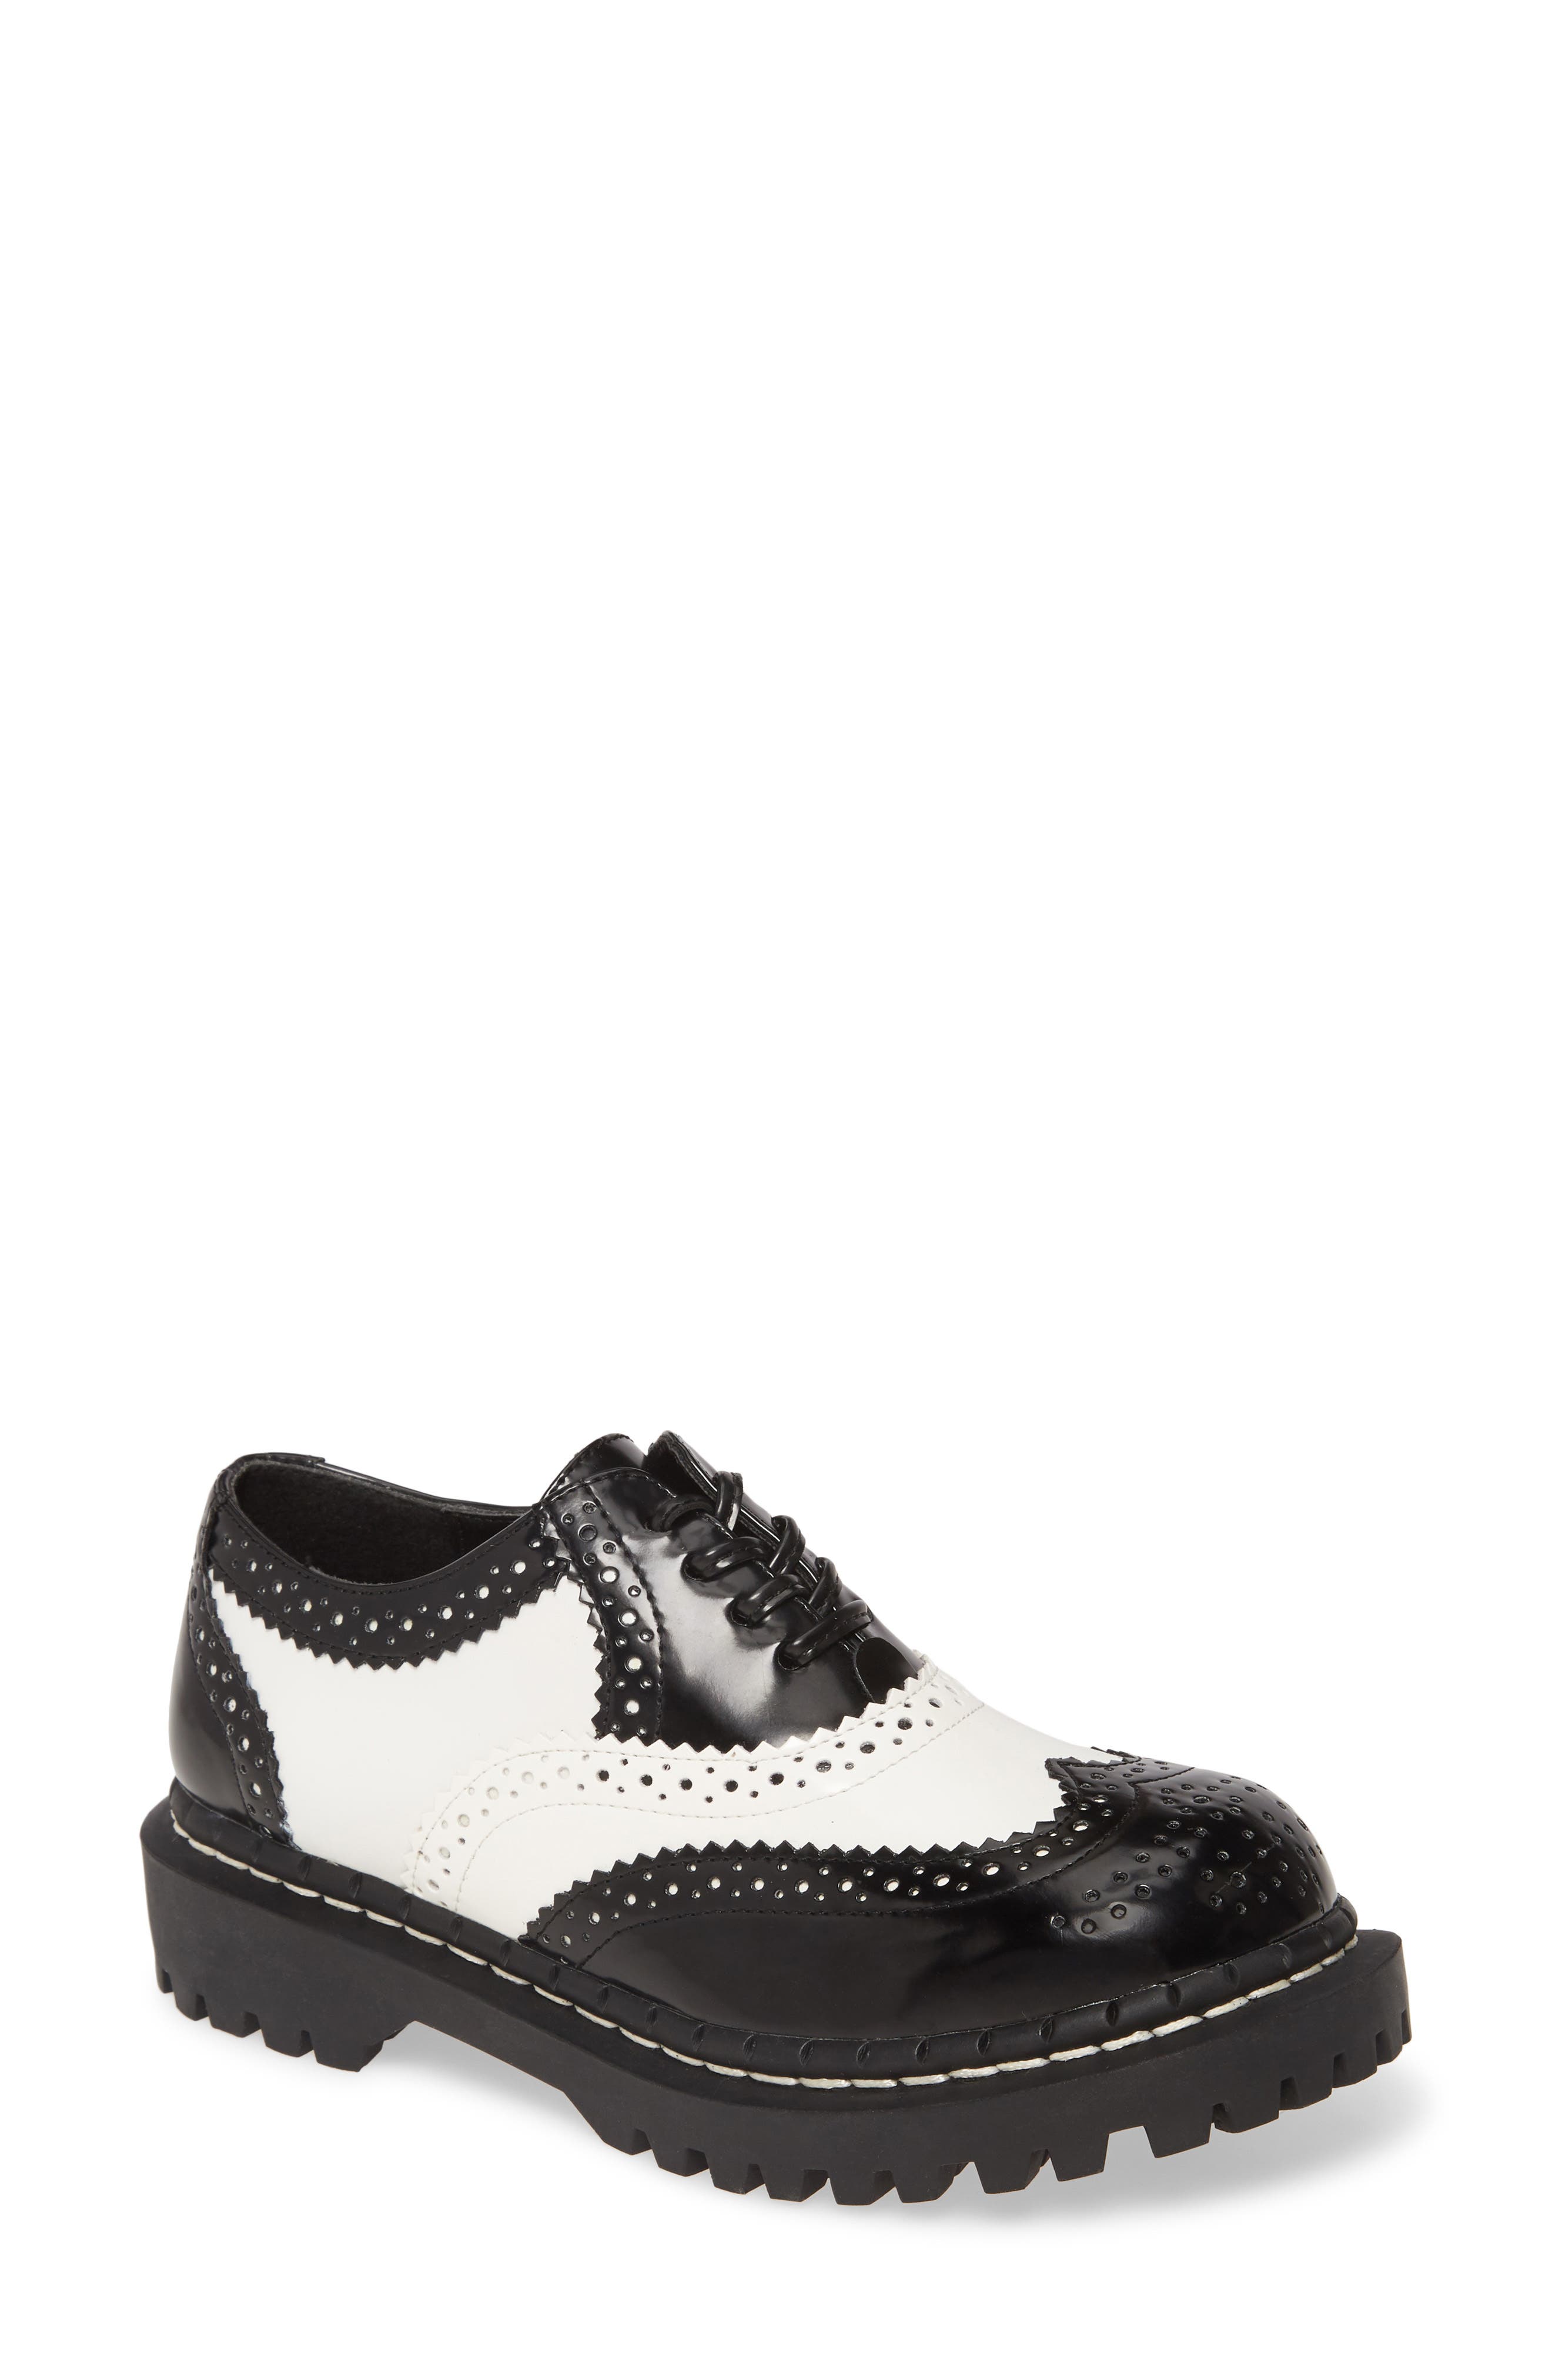 jeffrey campbell oxford shoes